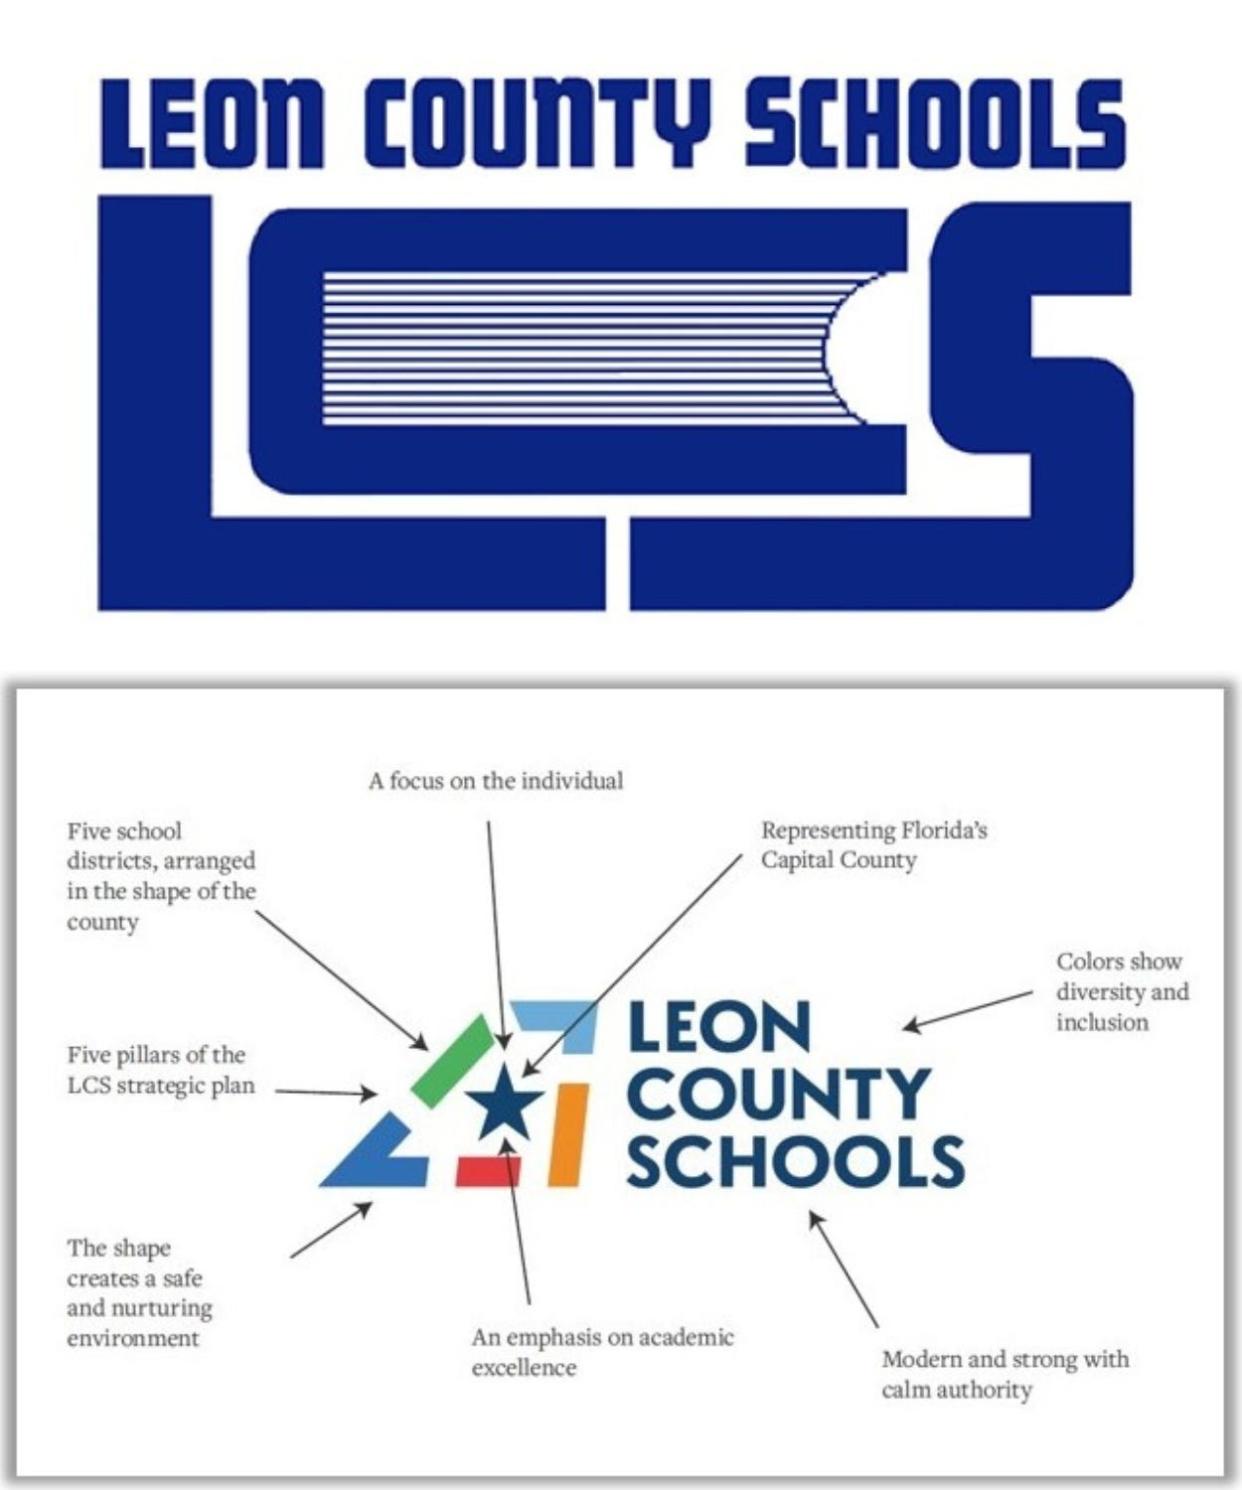 The old (at top) and approved new logos for Leon County Schools.